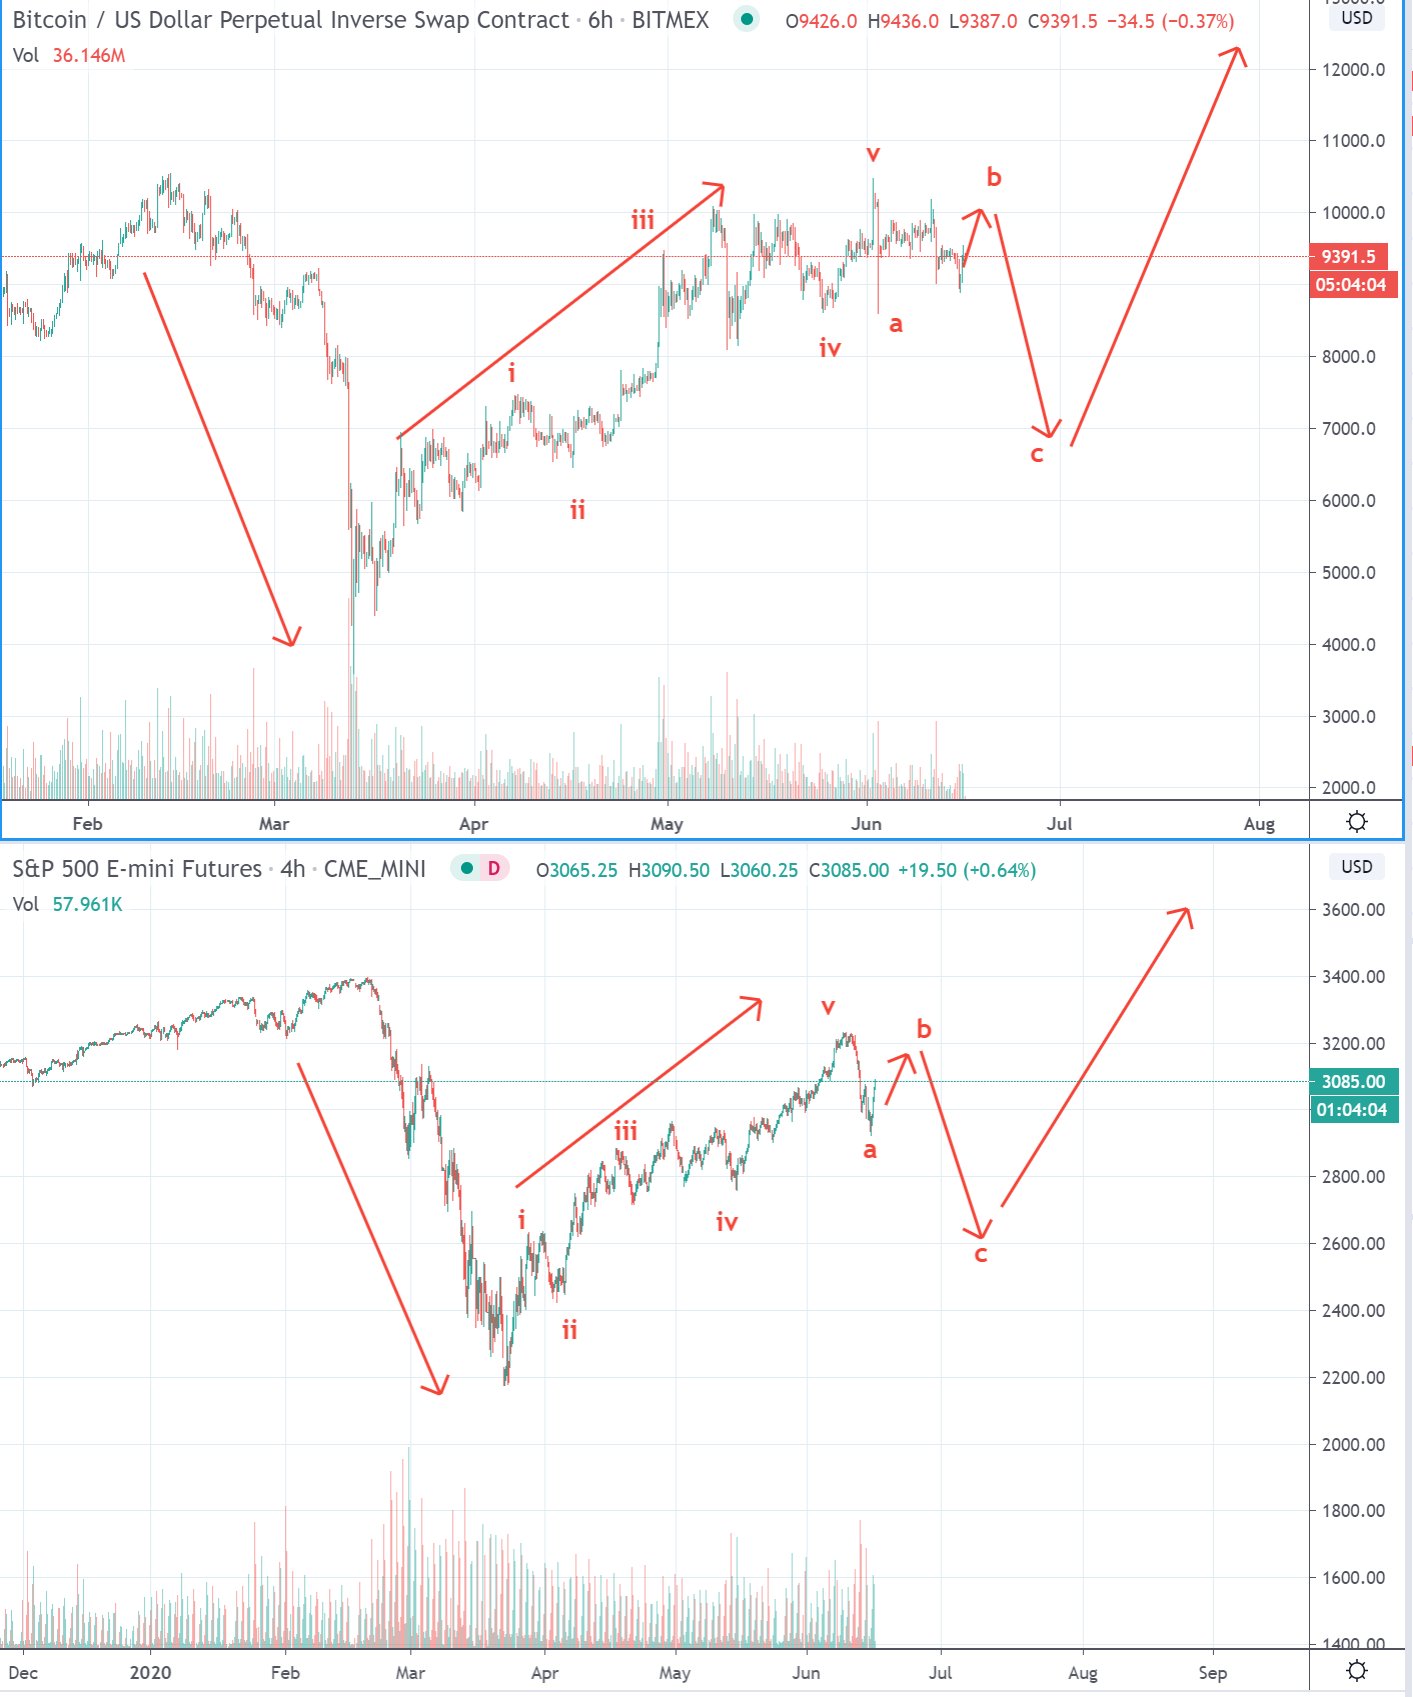 Charts of Bitcoin and S&P 500 futures in tandem shared by trader @SmartContracter (Twitter handle). Charts from TradingView.com